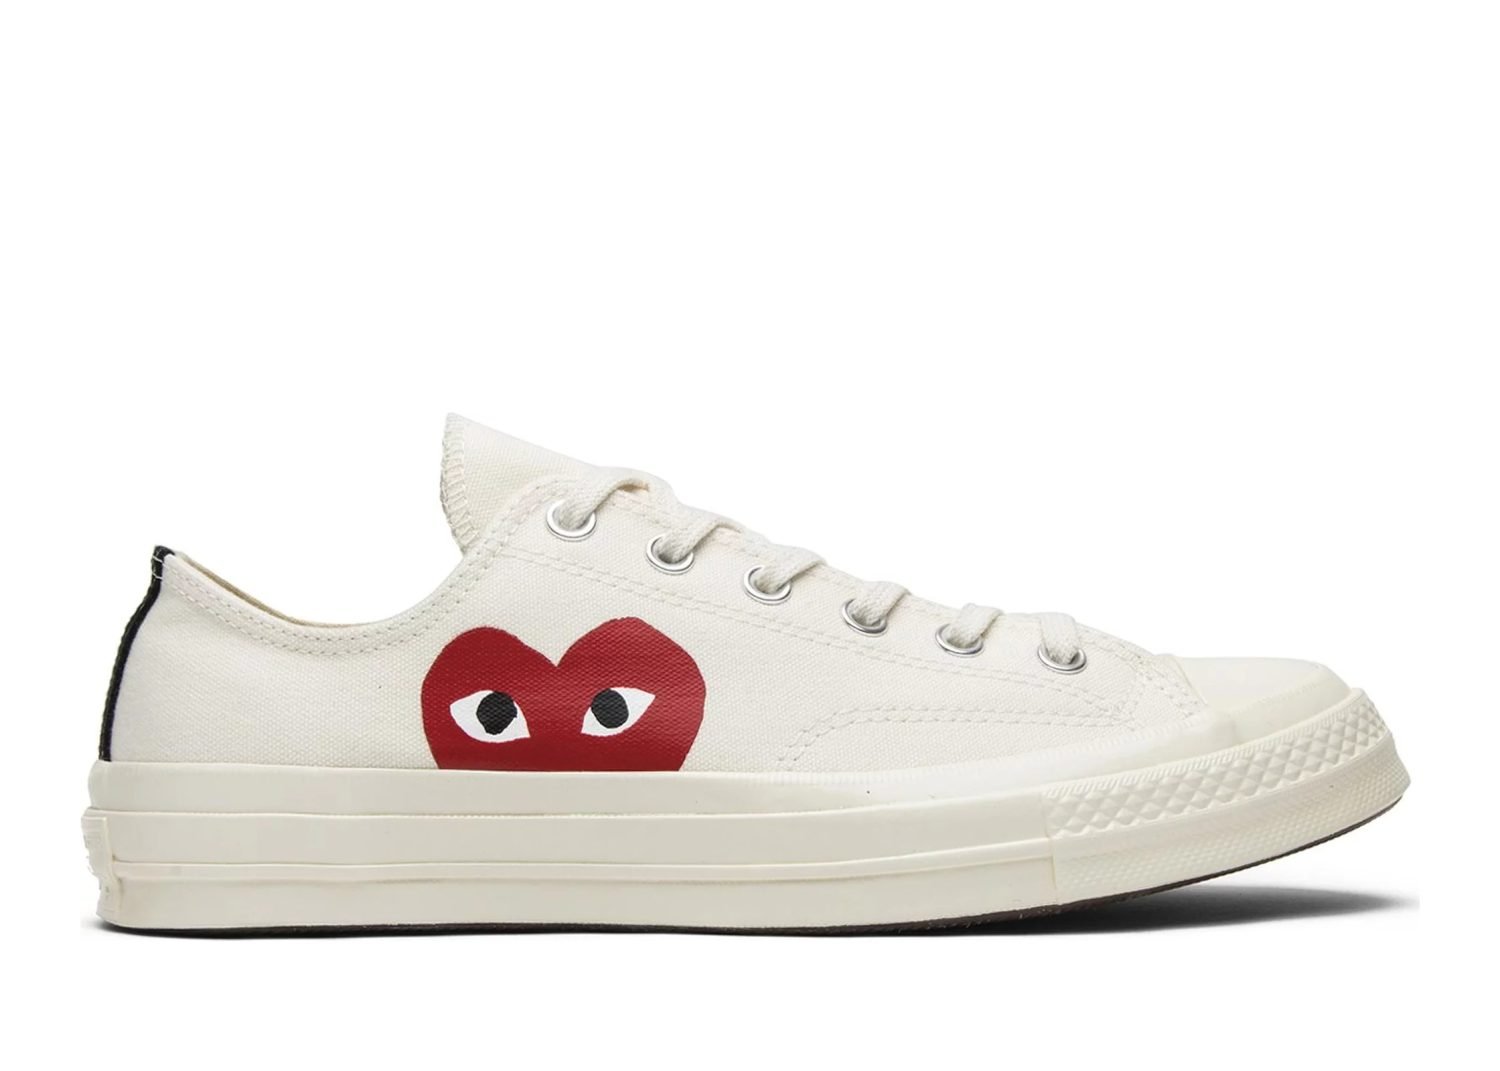 converse chuck taylor all star 70 ox comme des garcons play white